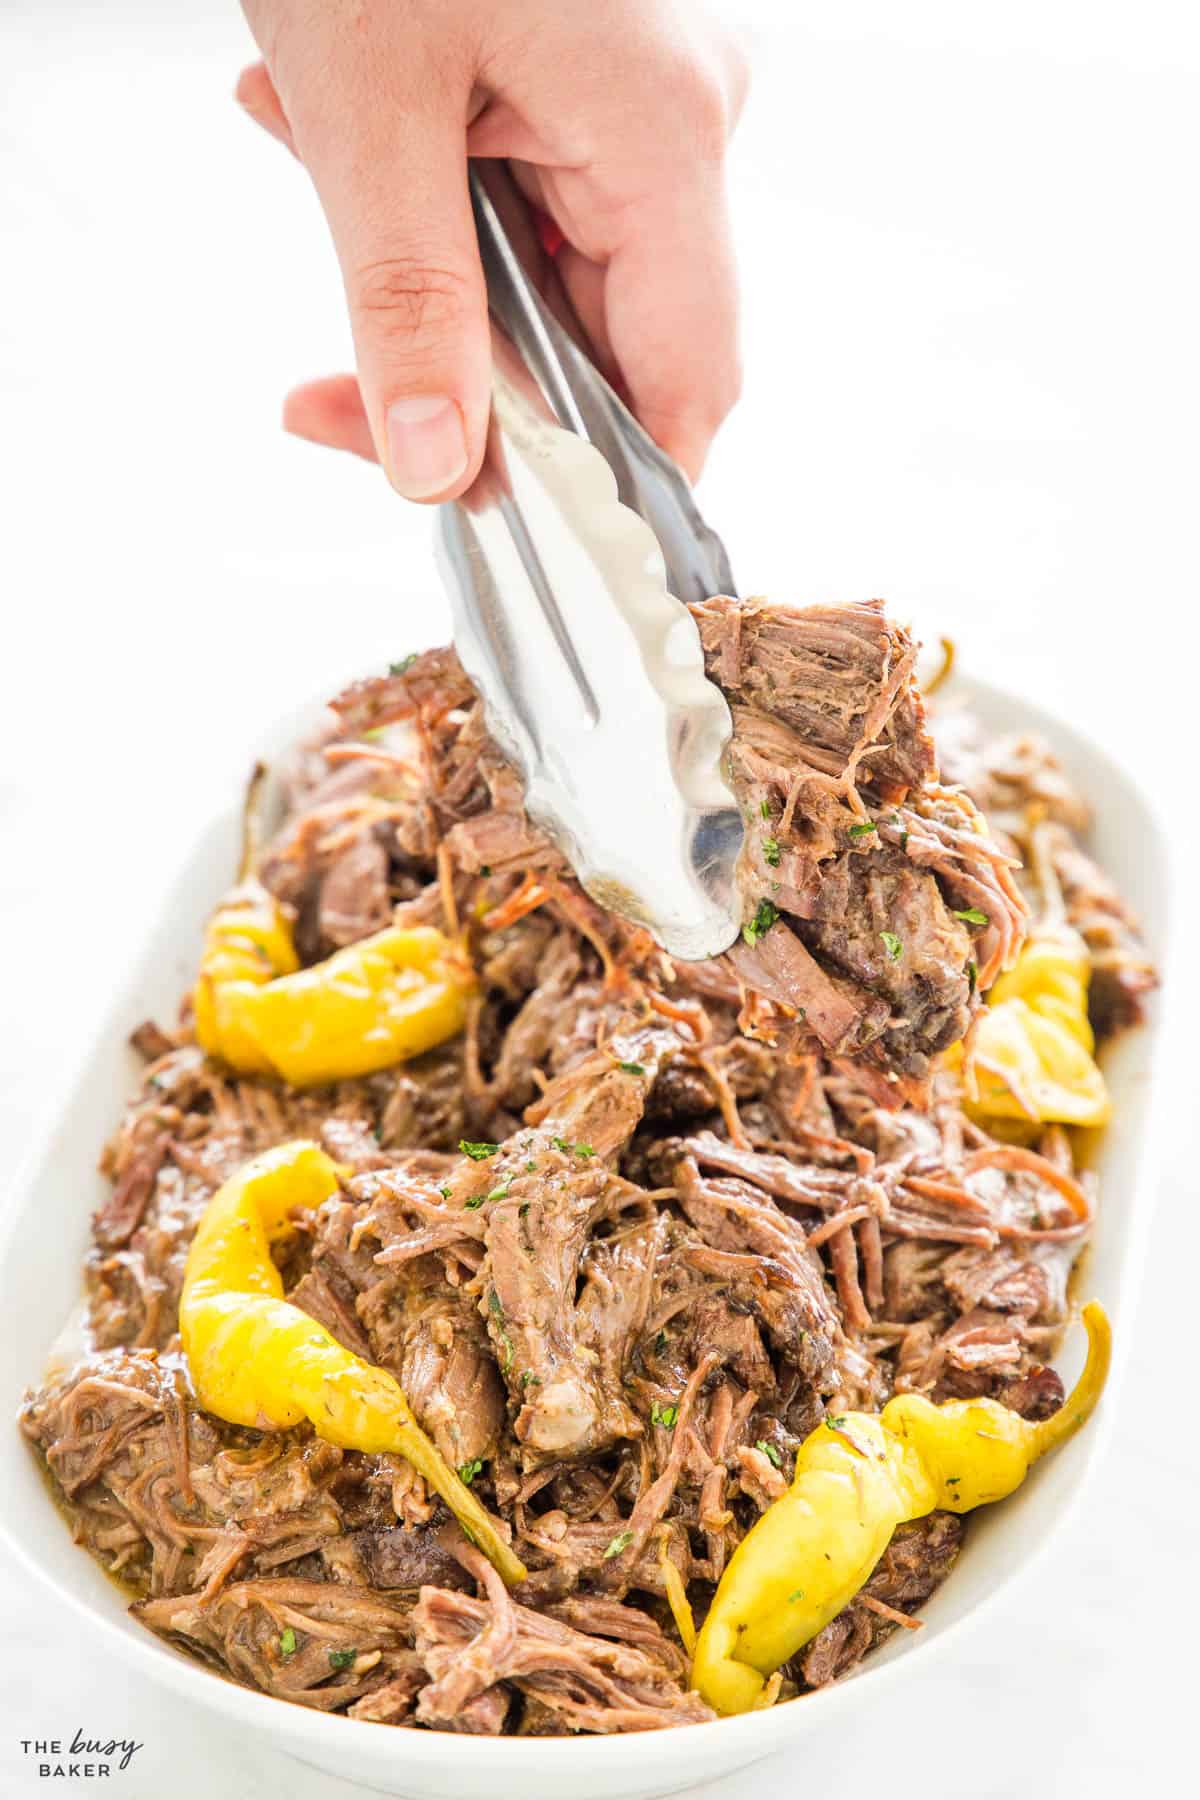 hand serving shredded beef with a pair of tongs